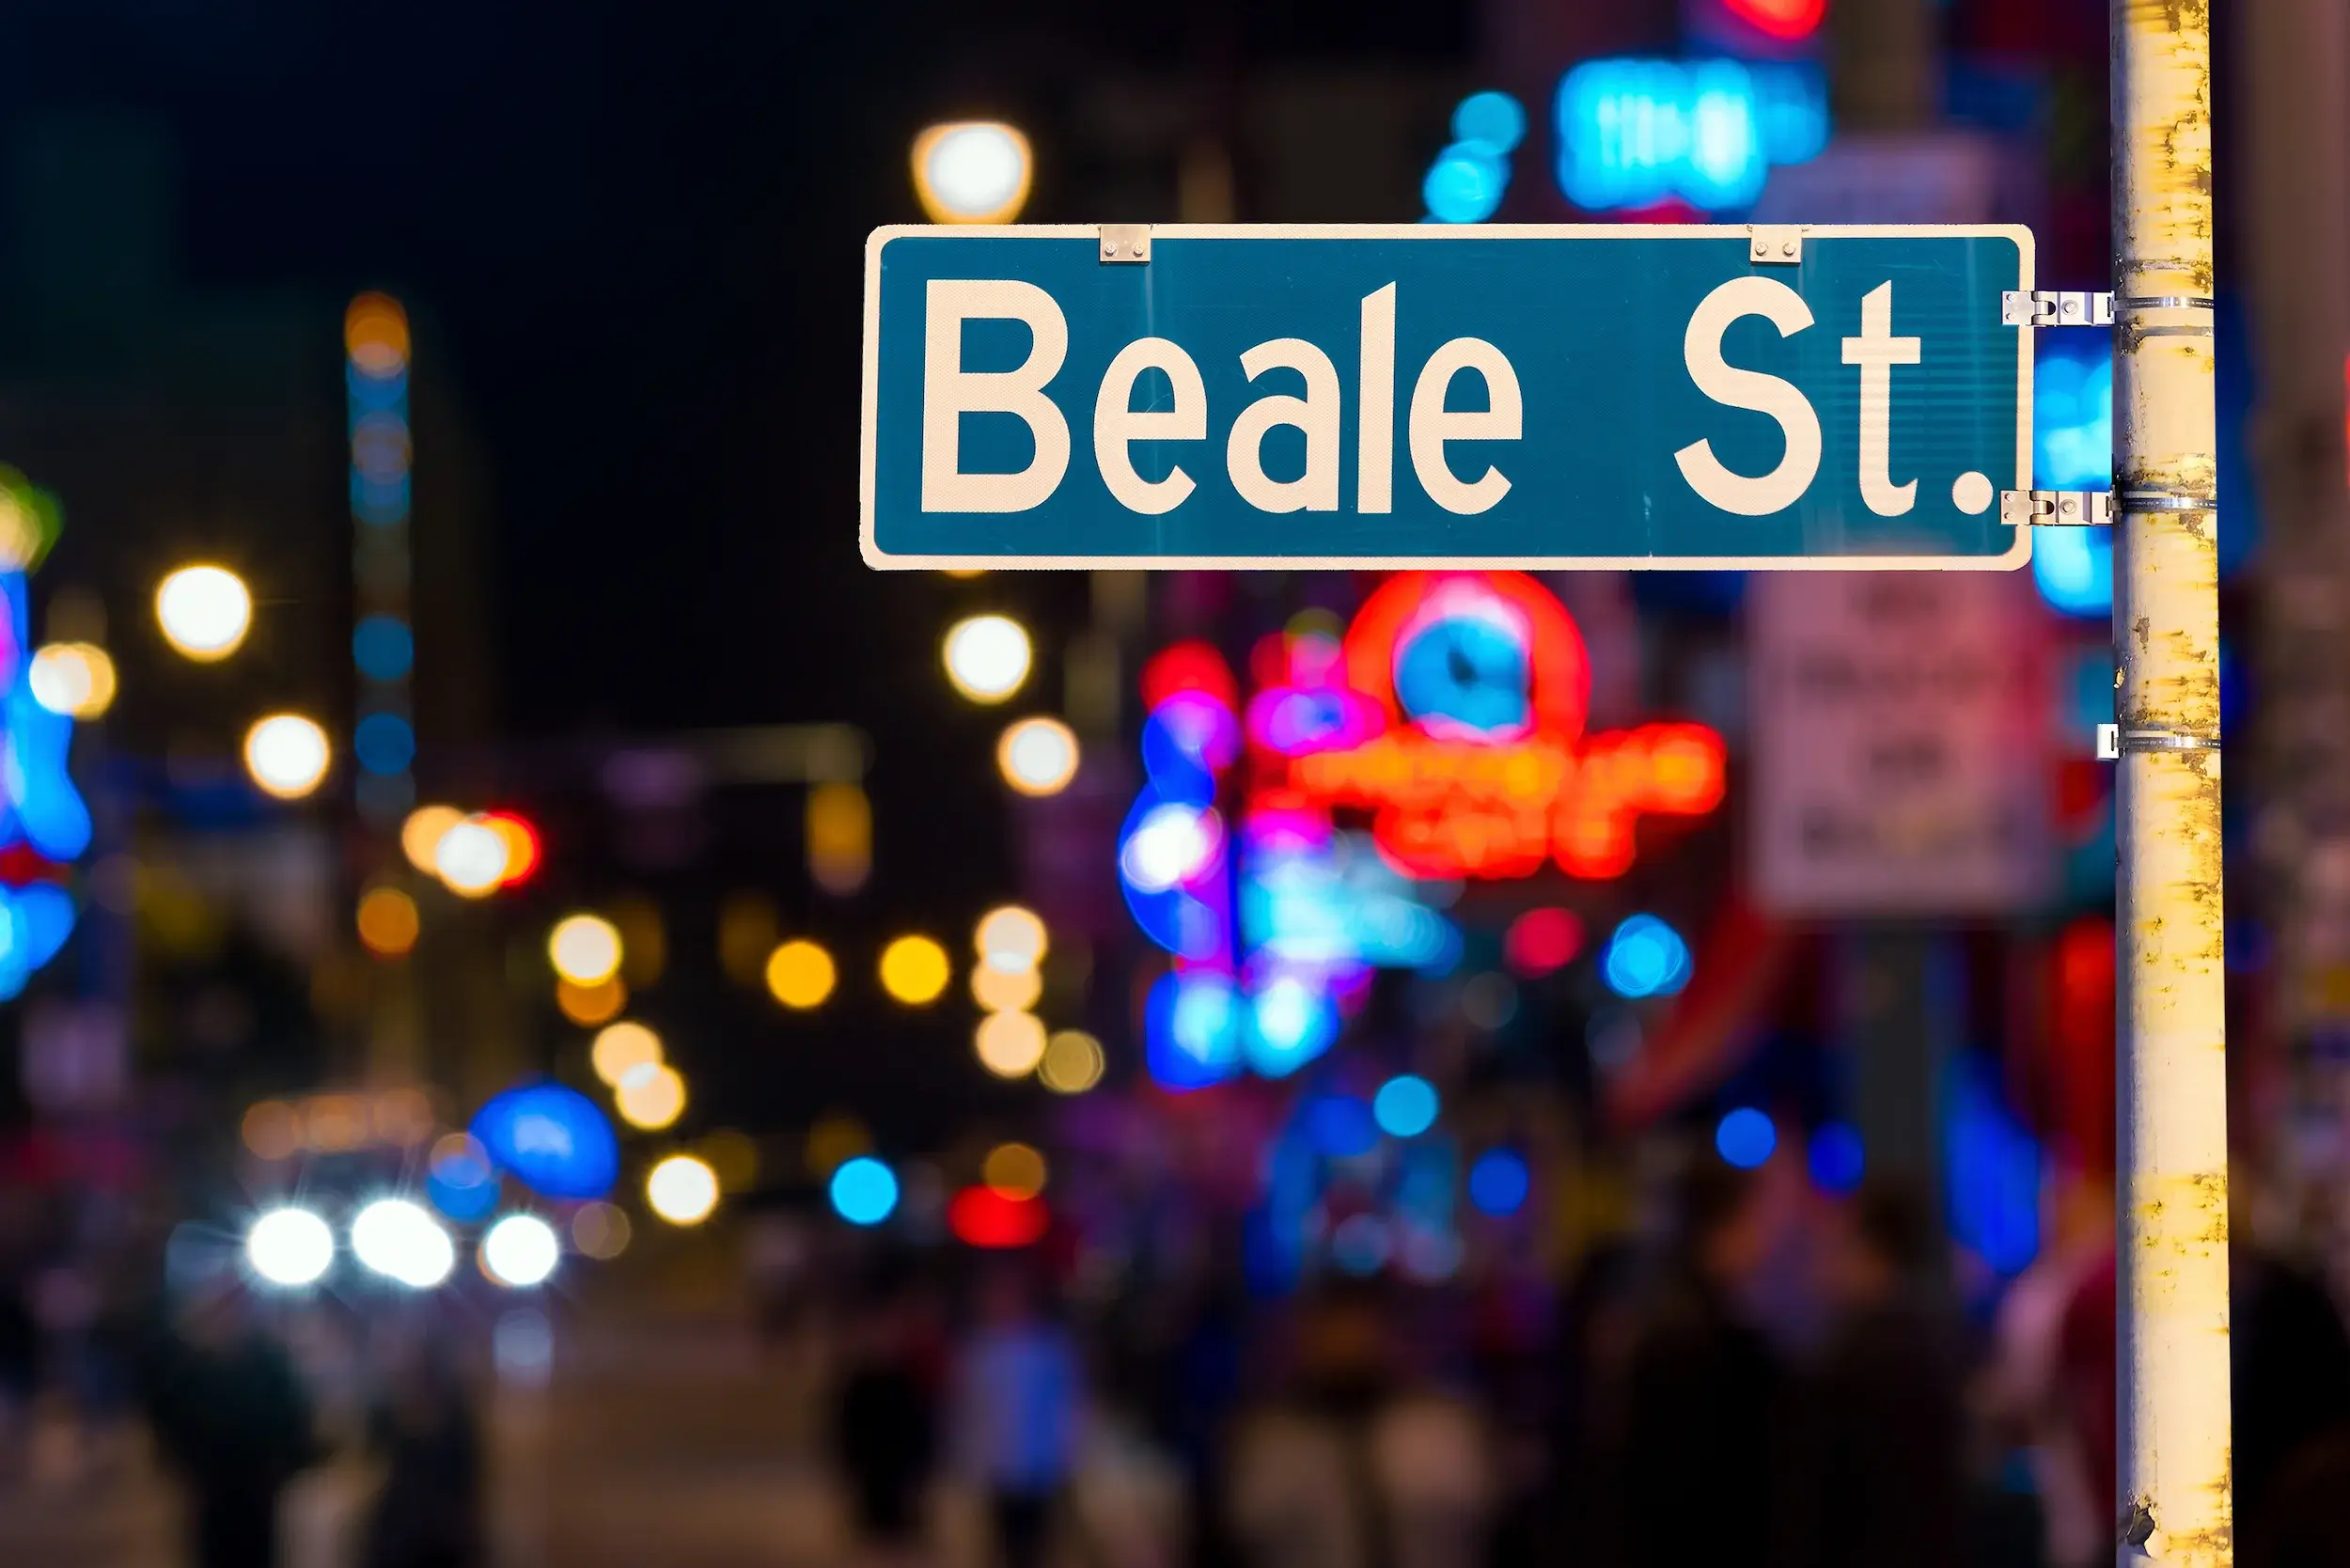 Beale street sign in Memphis, Tennessee